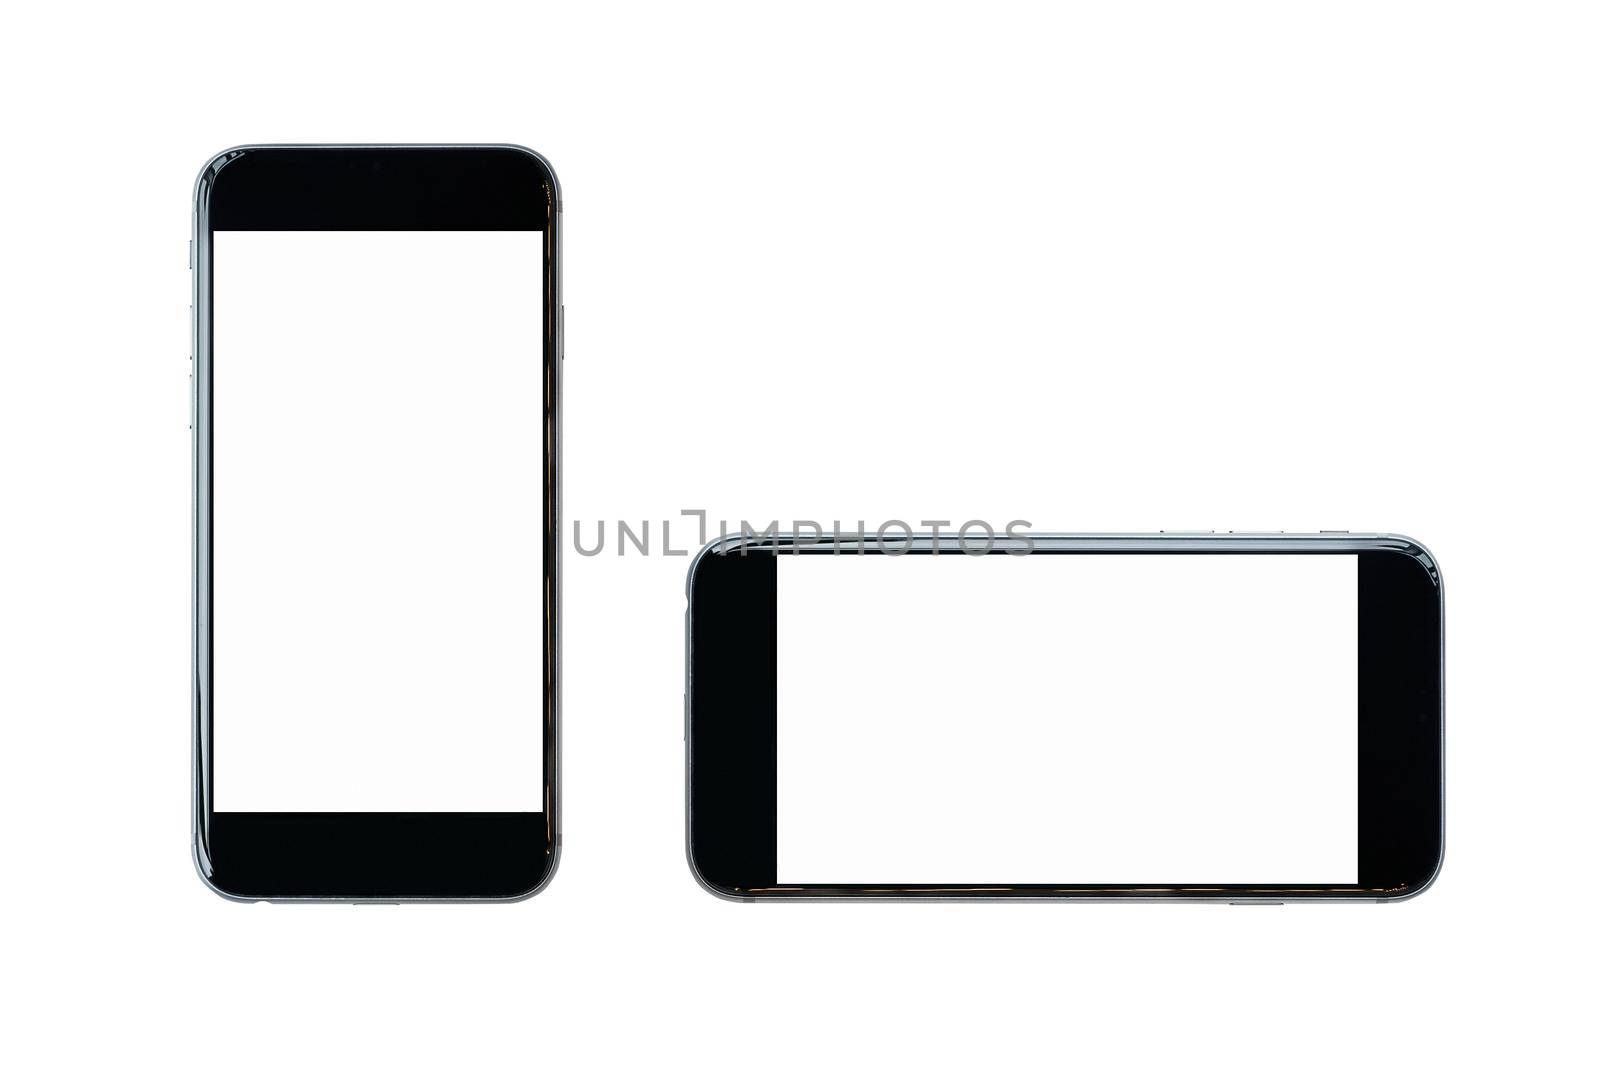 Smartphone with blank screen isolated on white background.Photo design for smart technology and internet of things concept.